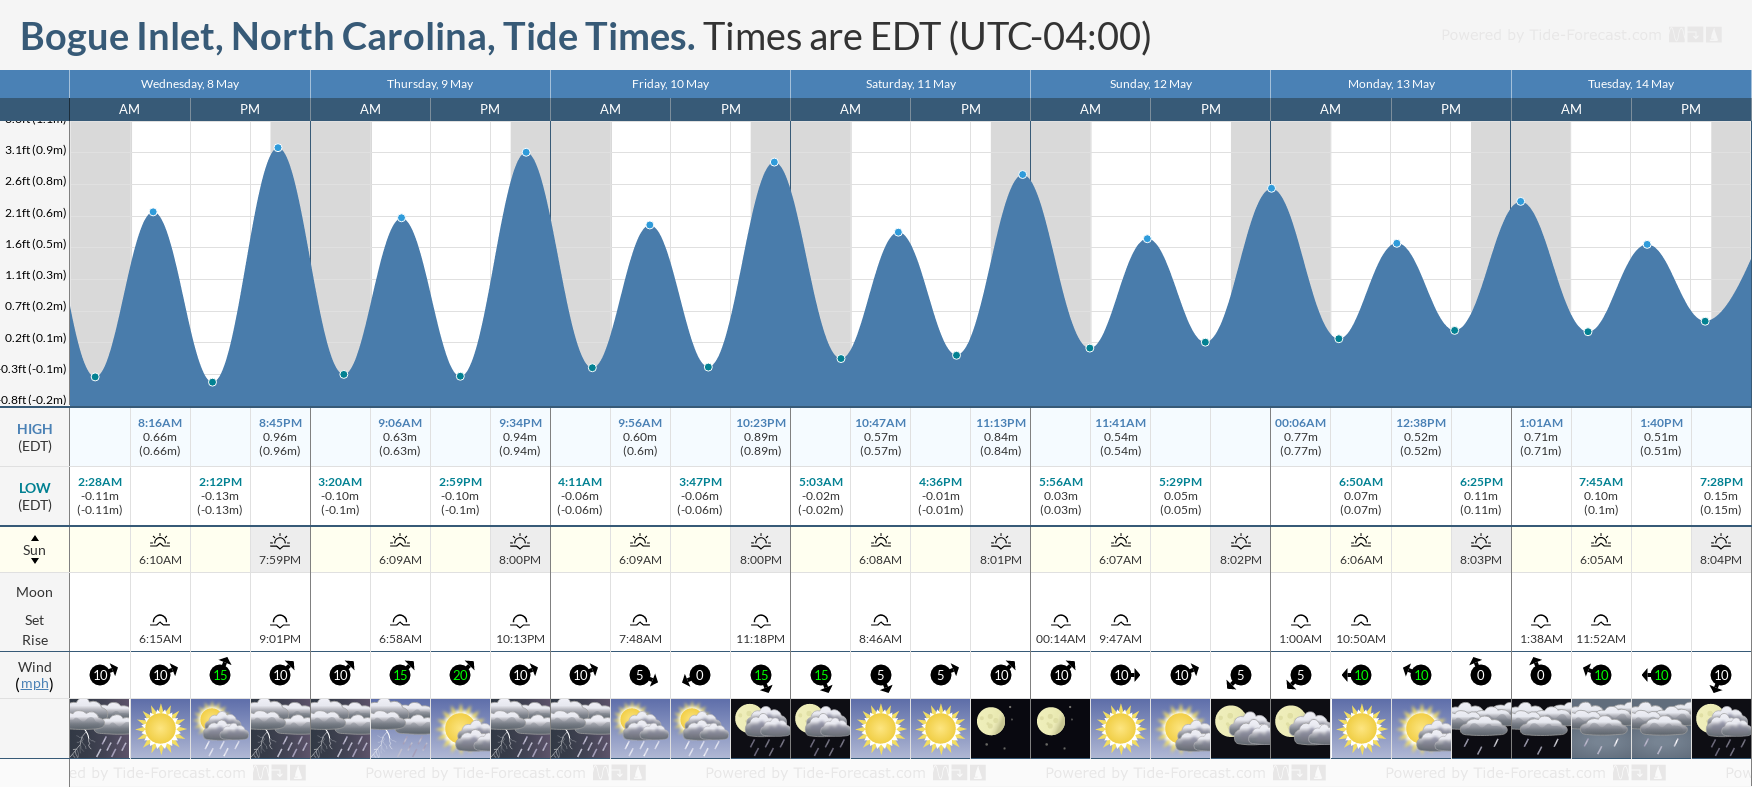 Bogue Inlet, North Carolina Tide Chart including high and low tide tide times for the next 7 days